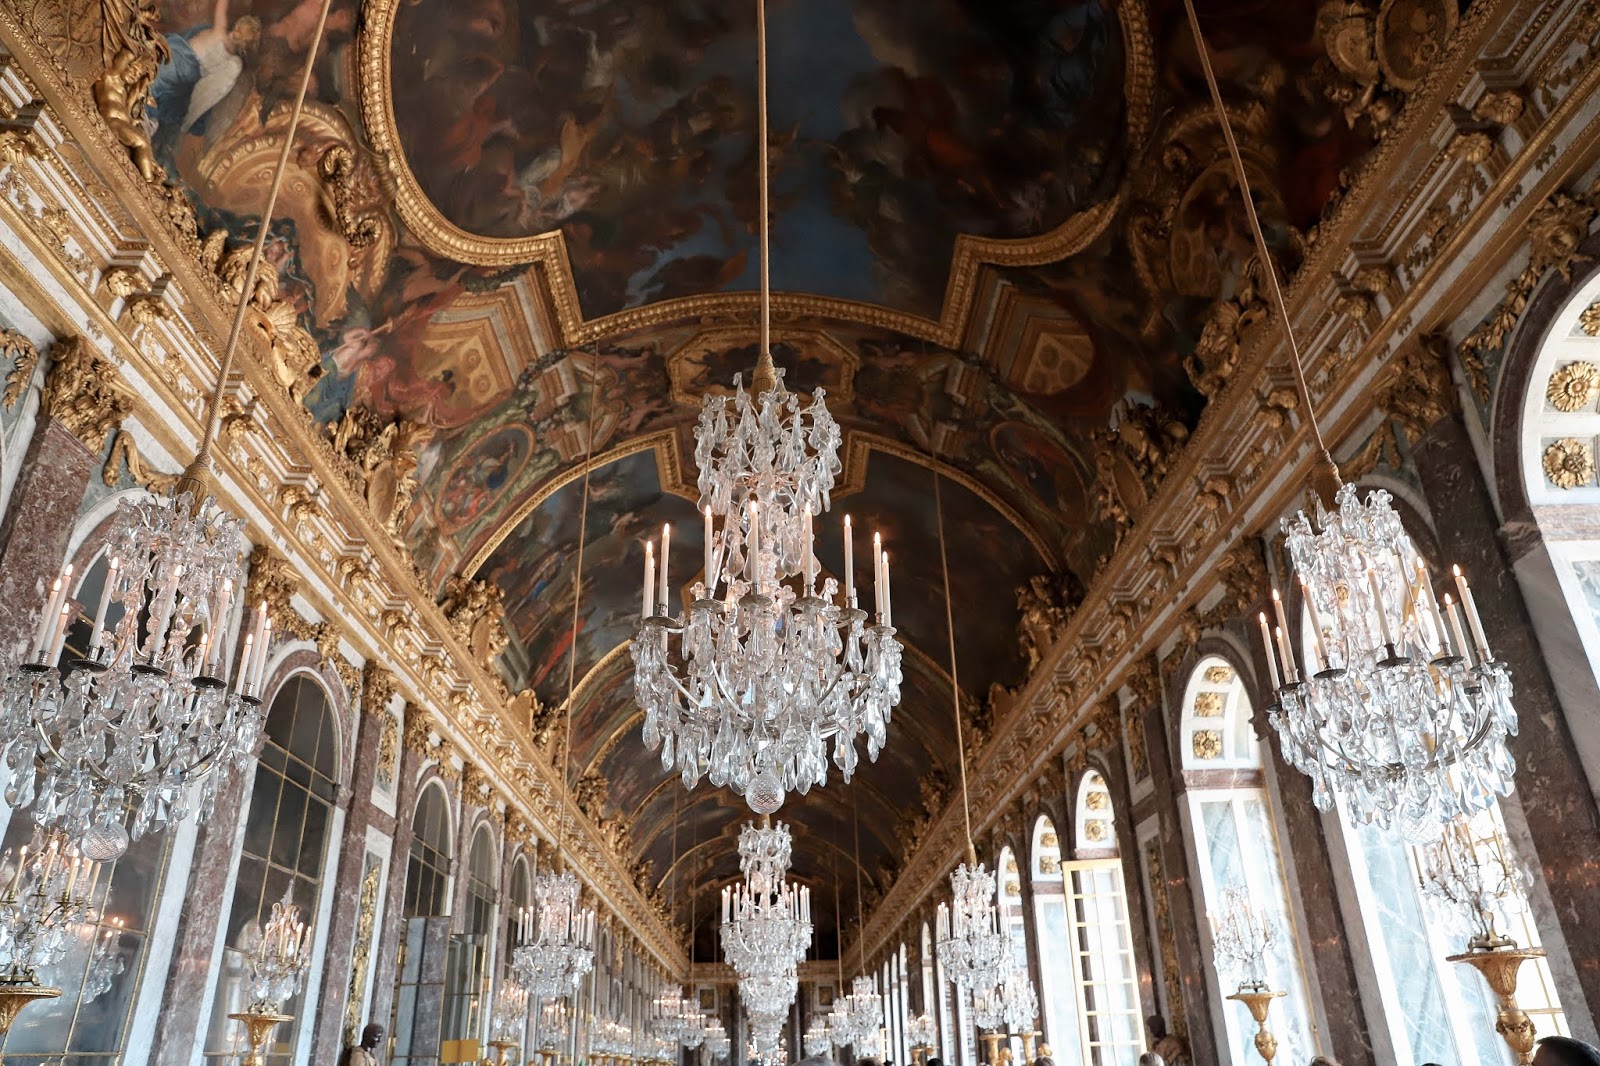 The Room of Mirrors at the Palace of Versailles